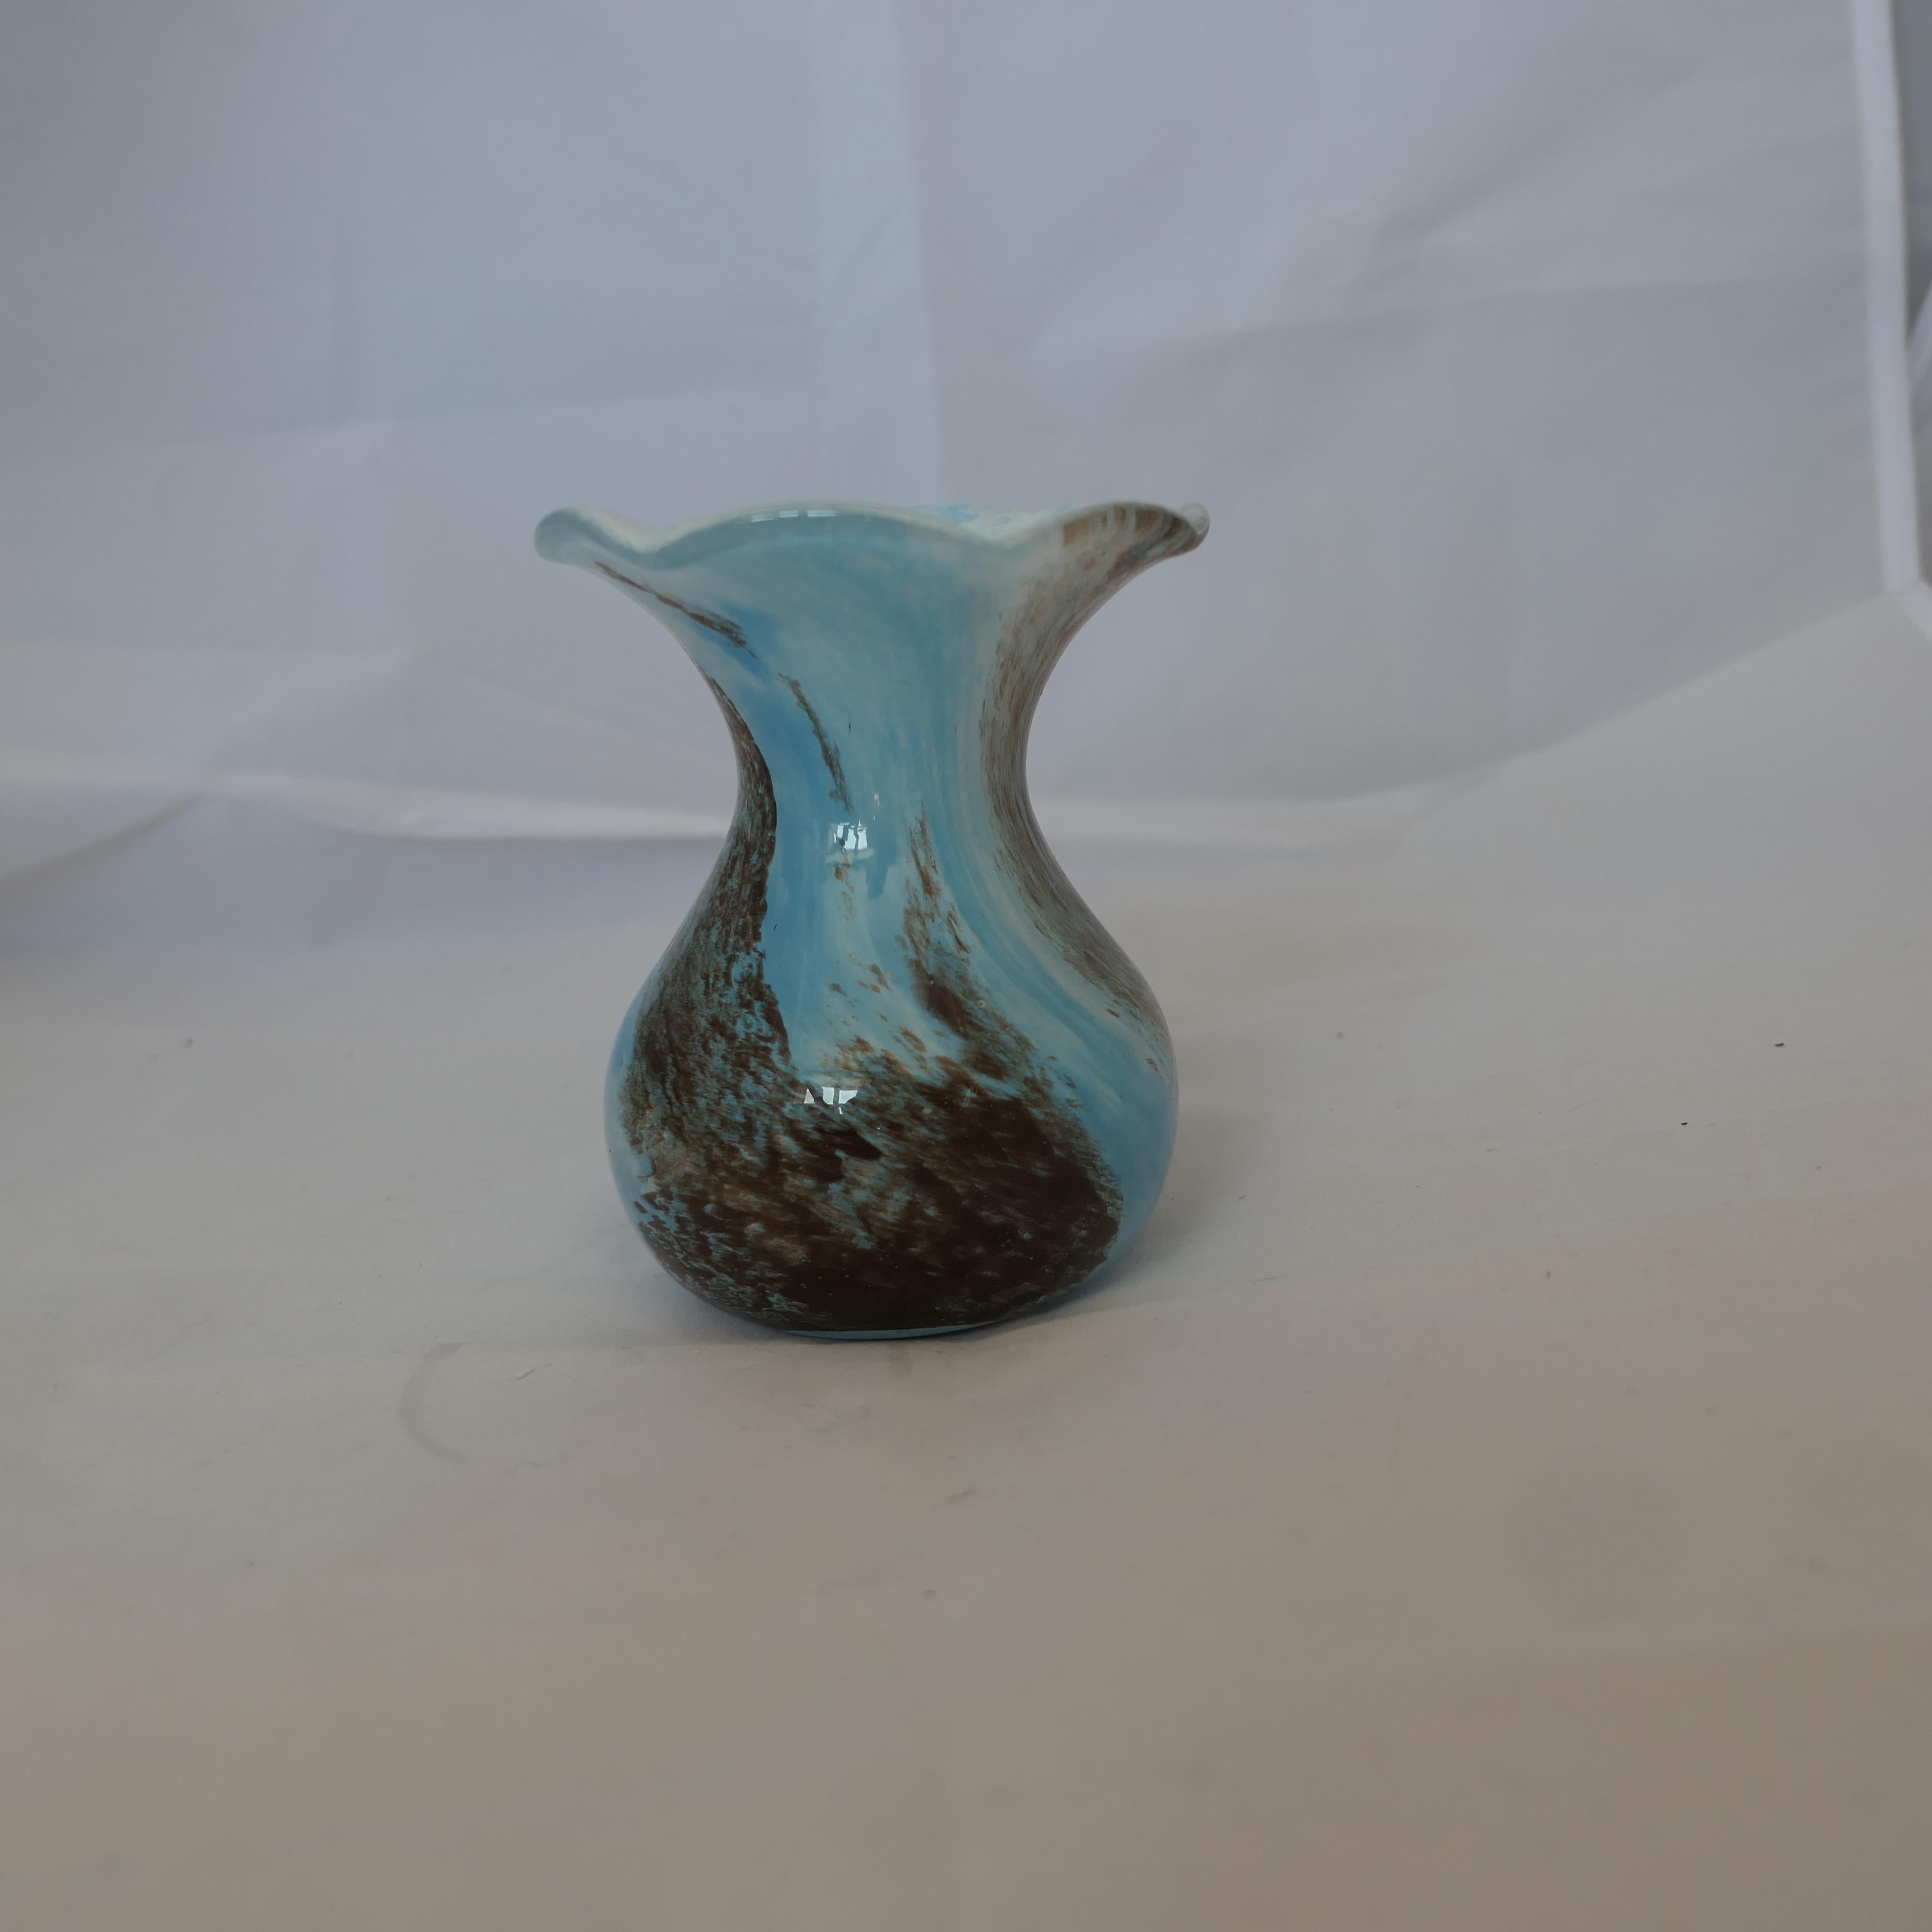 Hand Blown Victorian Blue Posy Vase

A delightful example of a Victorian Posy Vase, this one is in Blue to Grey
No Chips or Cracks
The Vase is 4” tall and 3.5” in Diameter
FB213